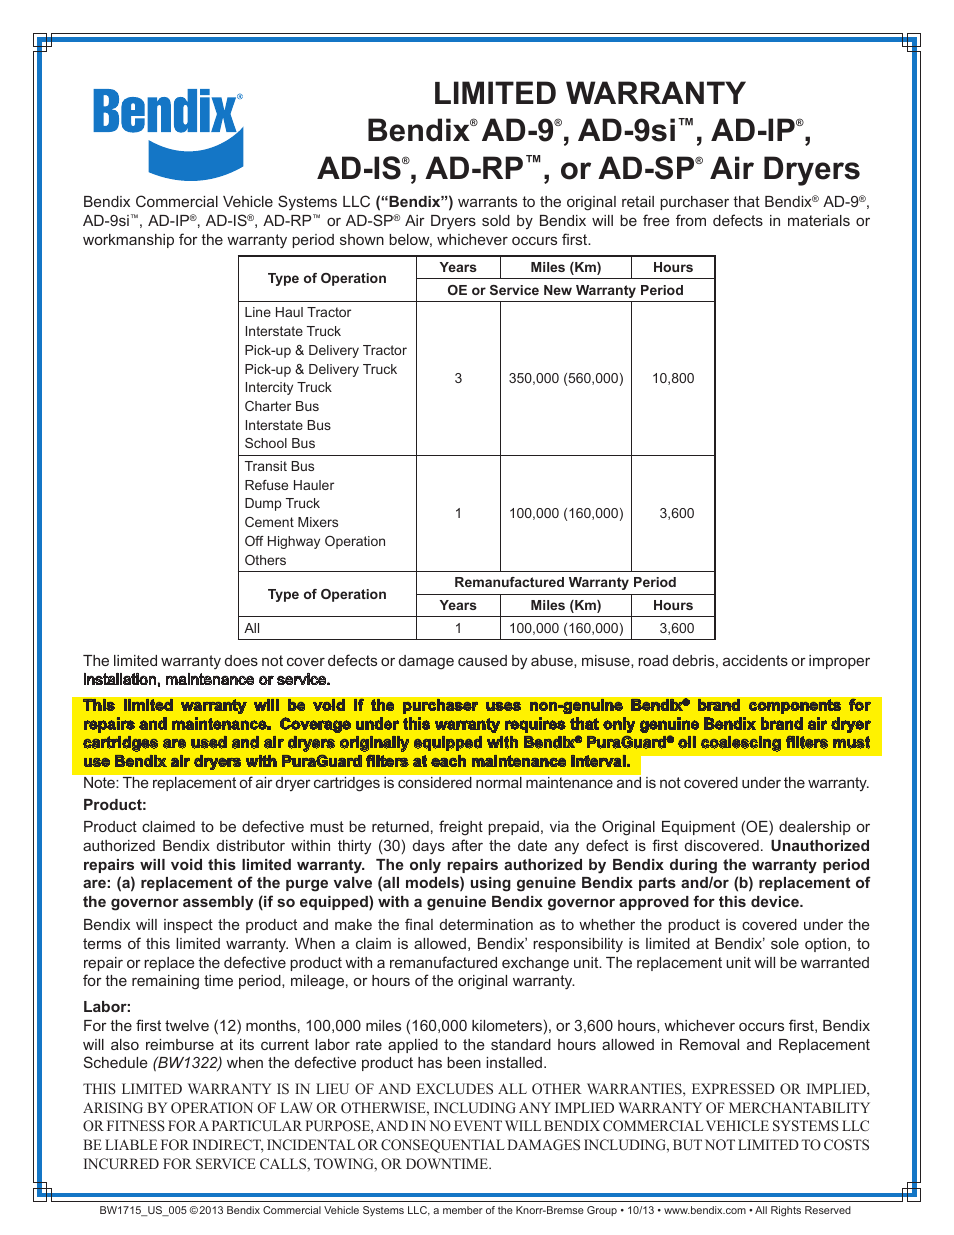 AD-SP Air Dryers